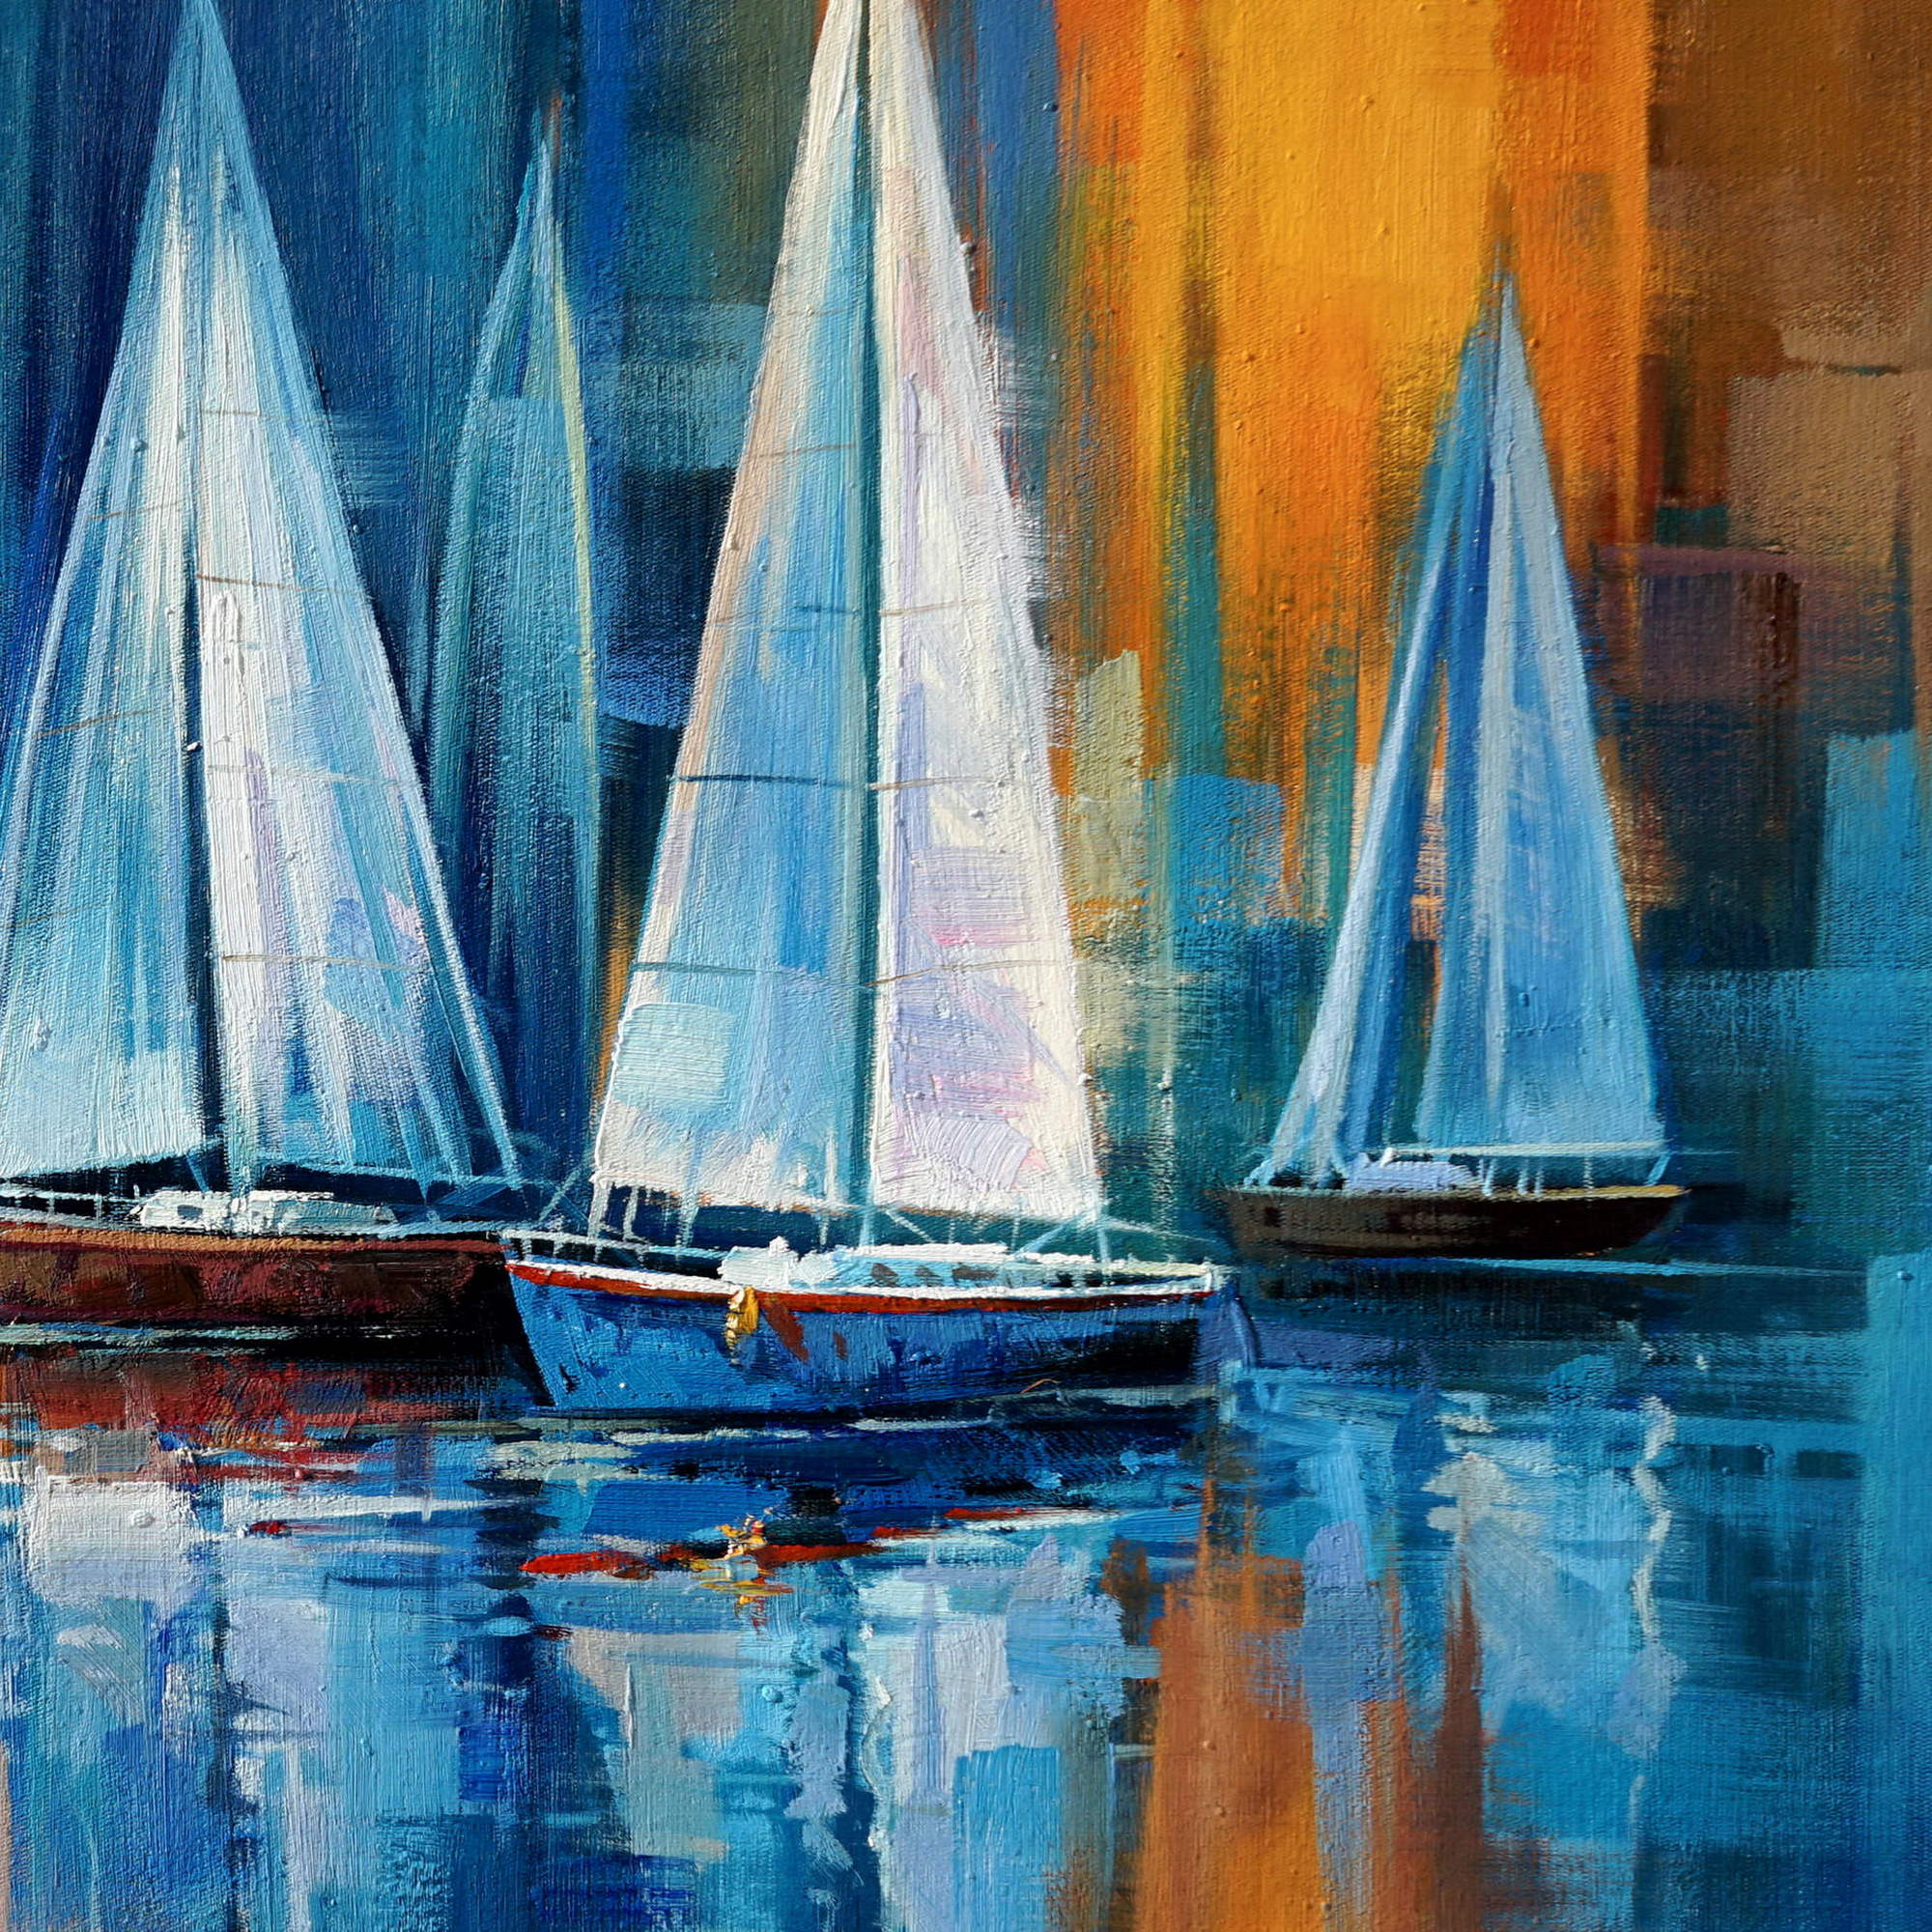 Abstract painting Sails at Sunset 60x120cm